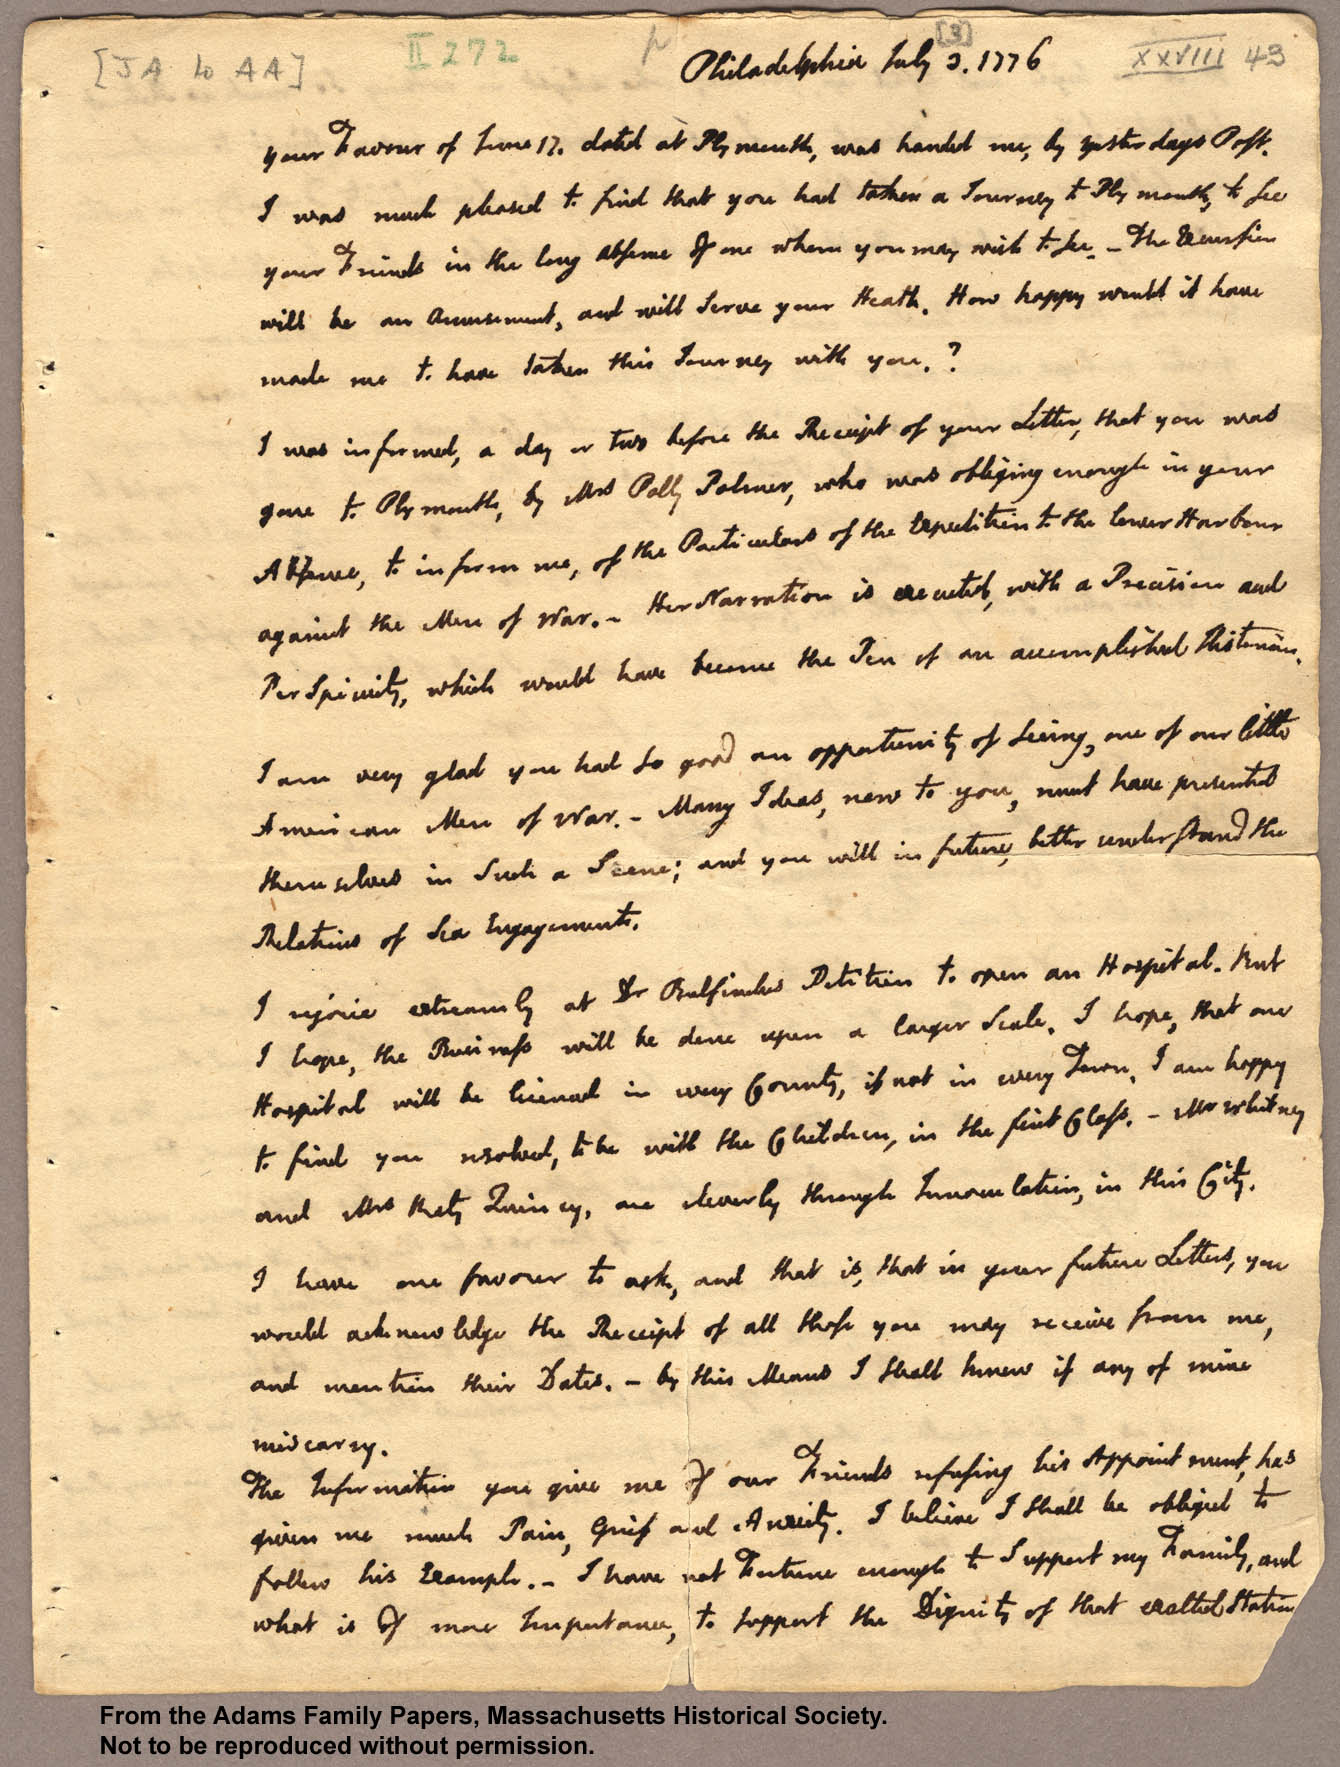 Image of a letter from John Adams